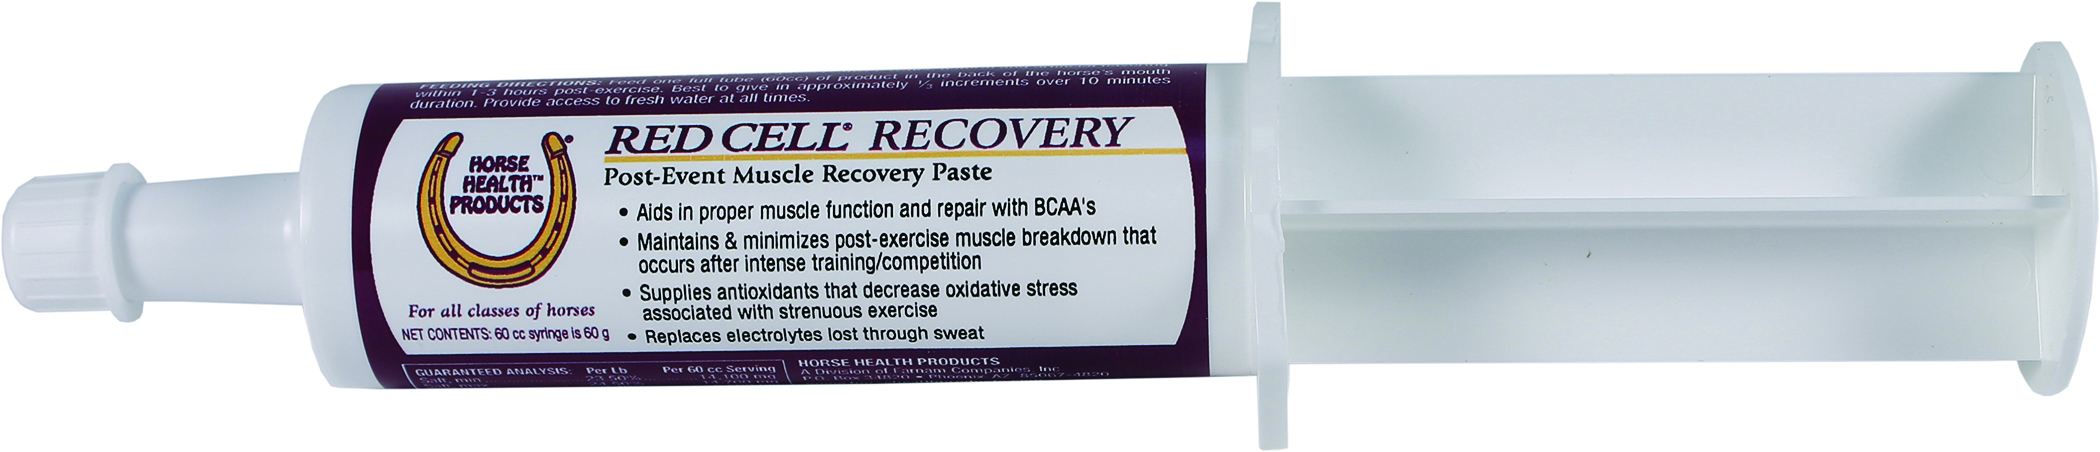 RED CELL RECOVERY PASTE FOR HORSE MUSCLES